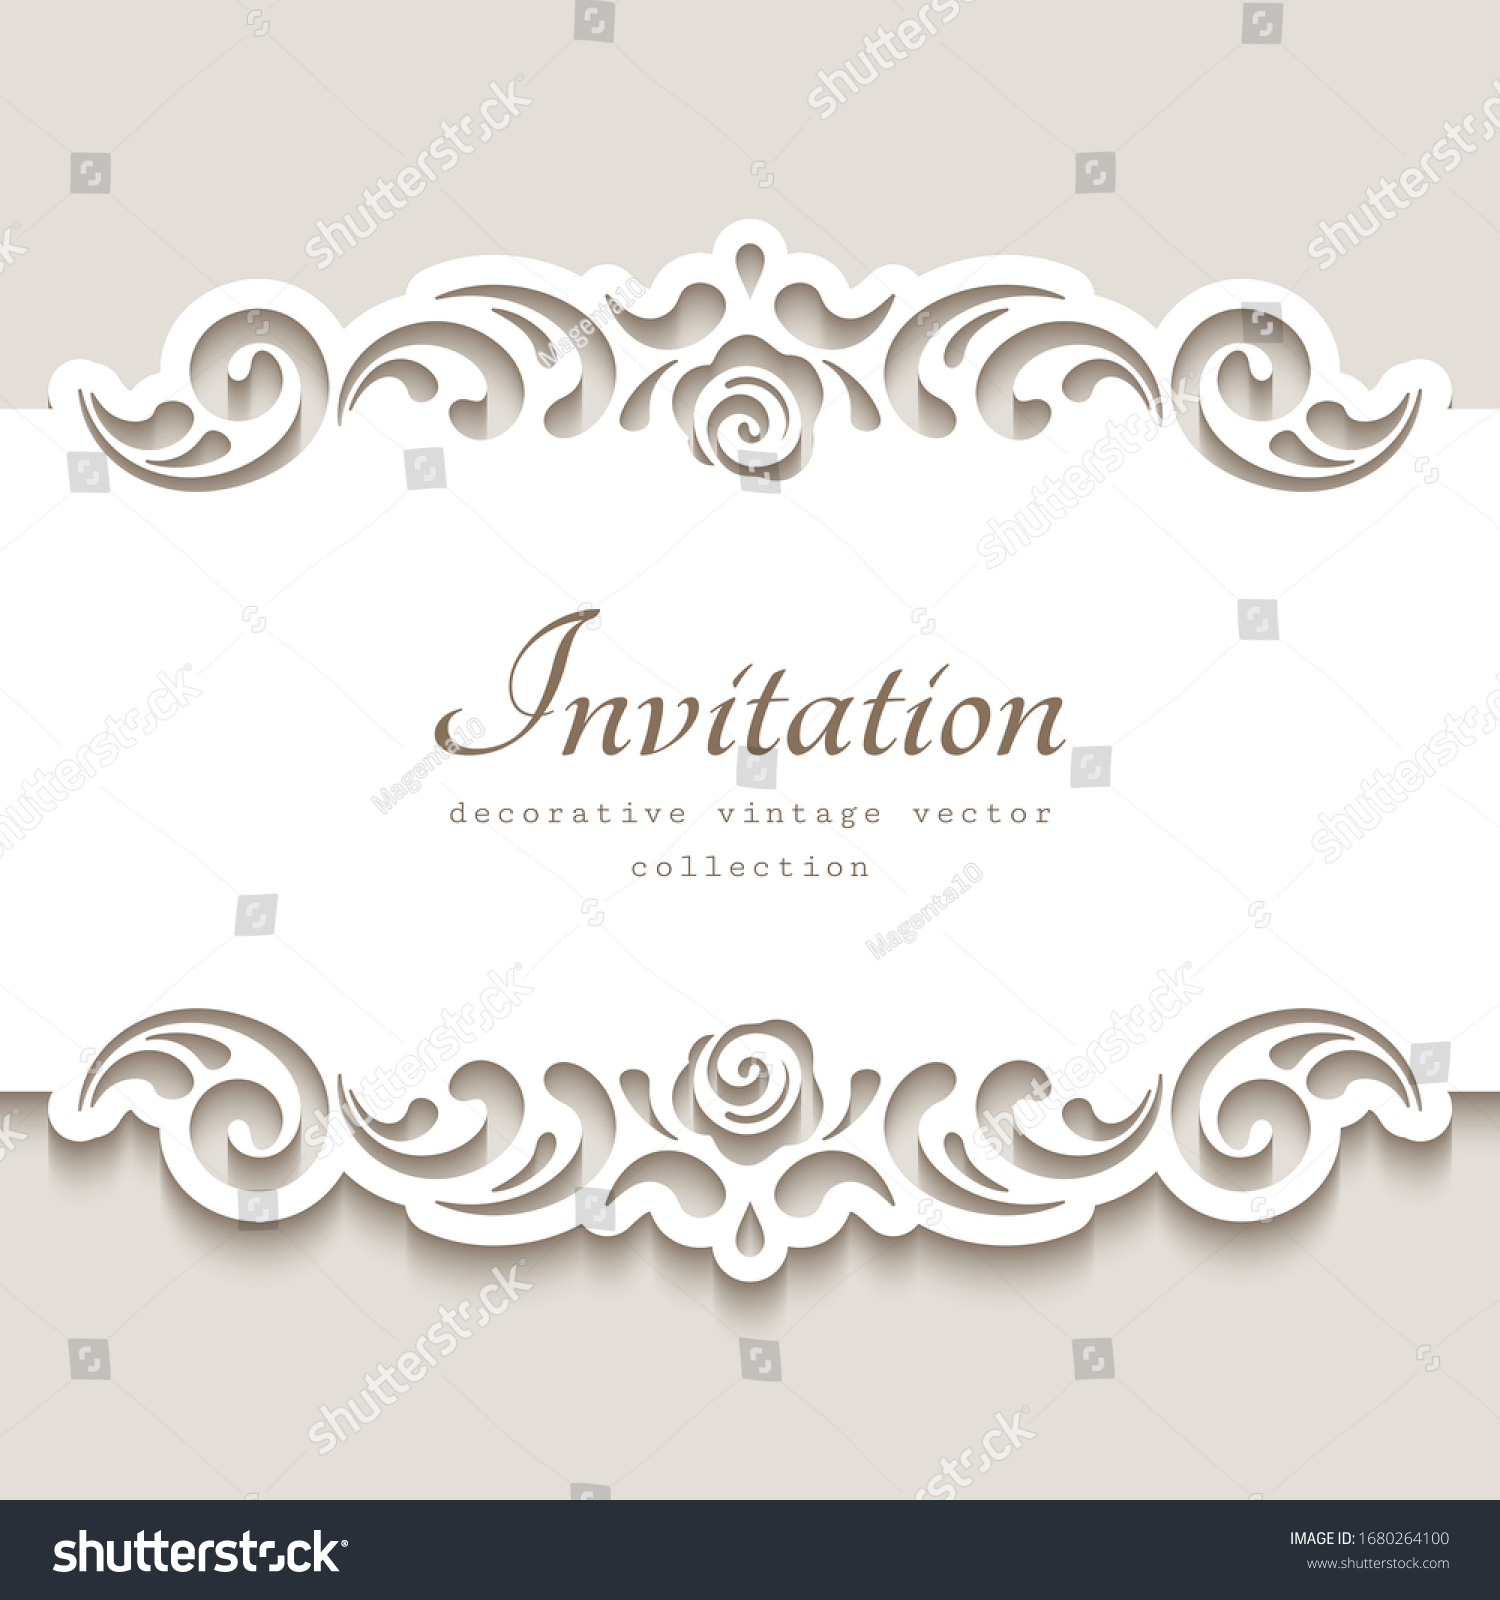 SVG of Cutout paper frame with swirly lace borders. Belly band decoration. Vintage vector template for laser cutting or plotter printing. Elegant ornament for wedding invitation card design. Place for text svg